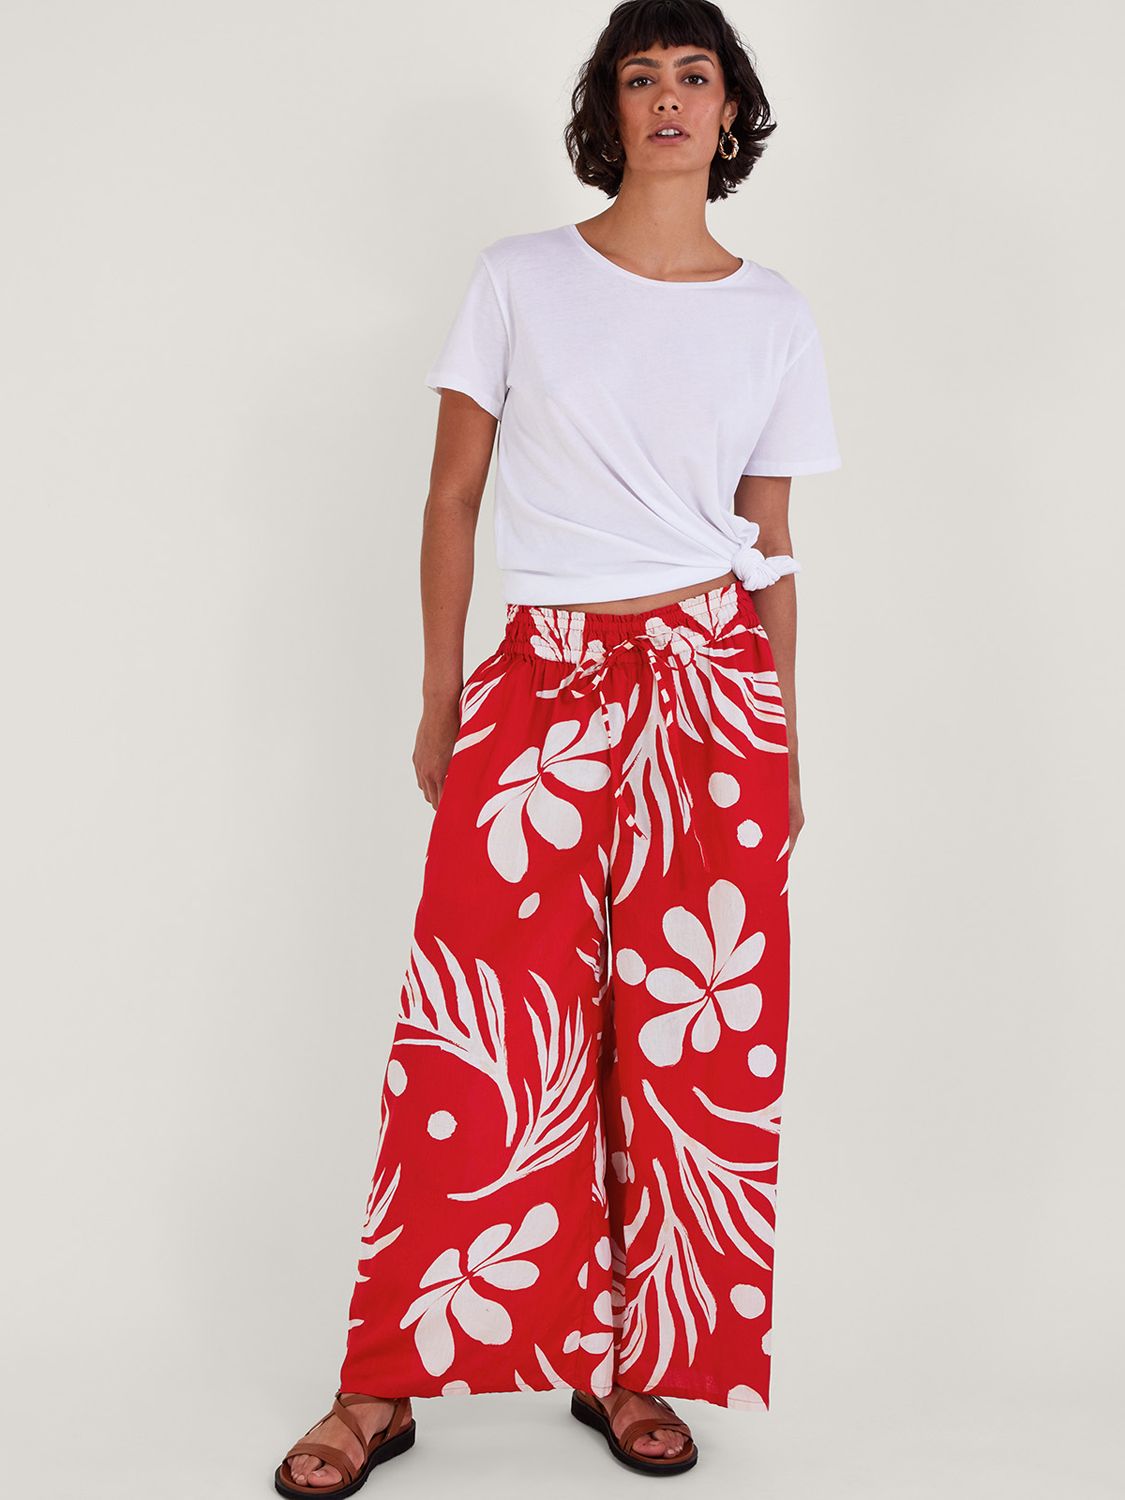 Monsoon Large Palm Print Wide Leg Trousers, Red, S